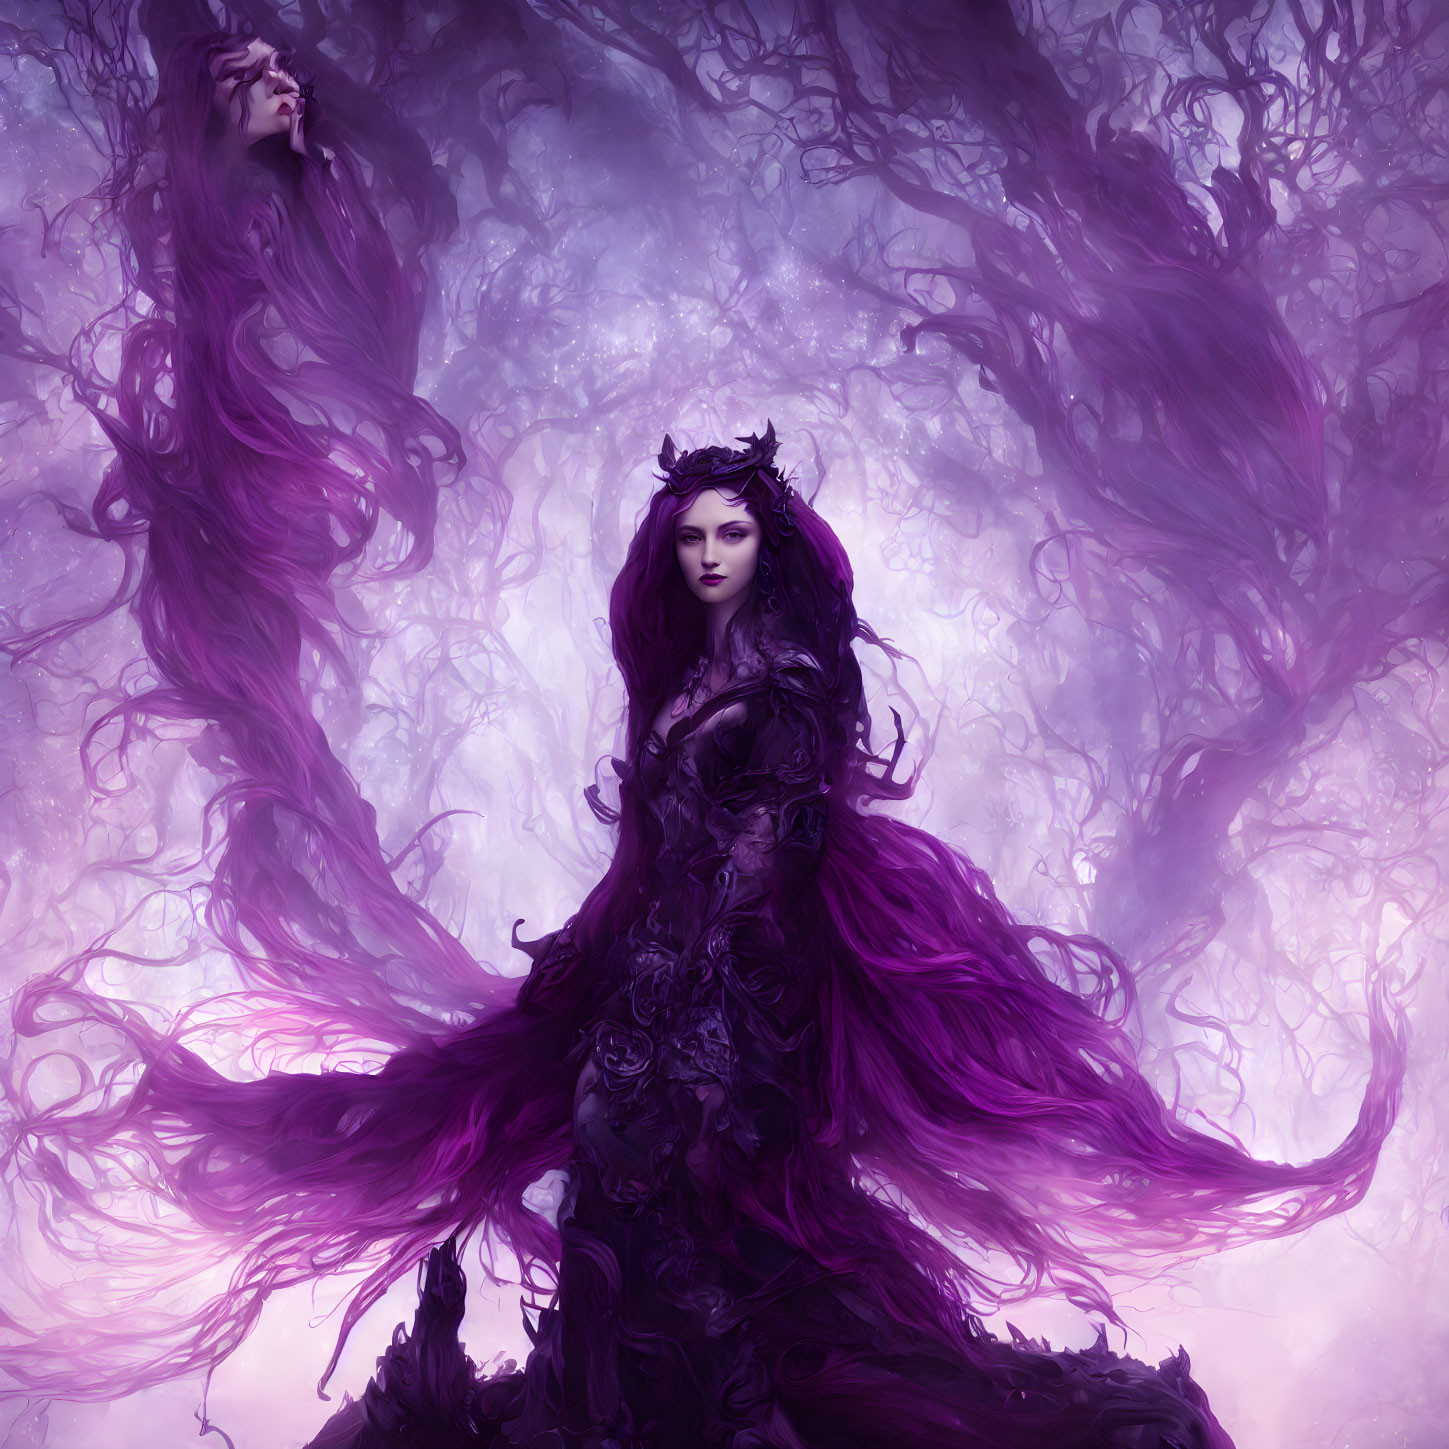 Dark-haired woman in purple gown surrounded by mystical fog and trees